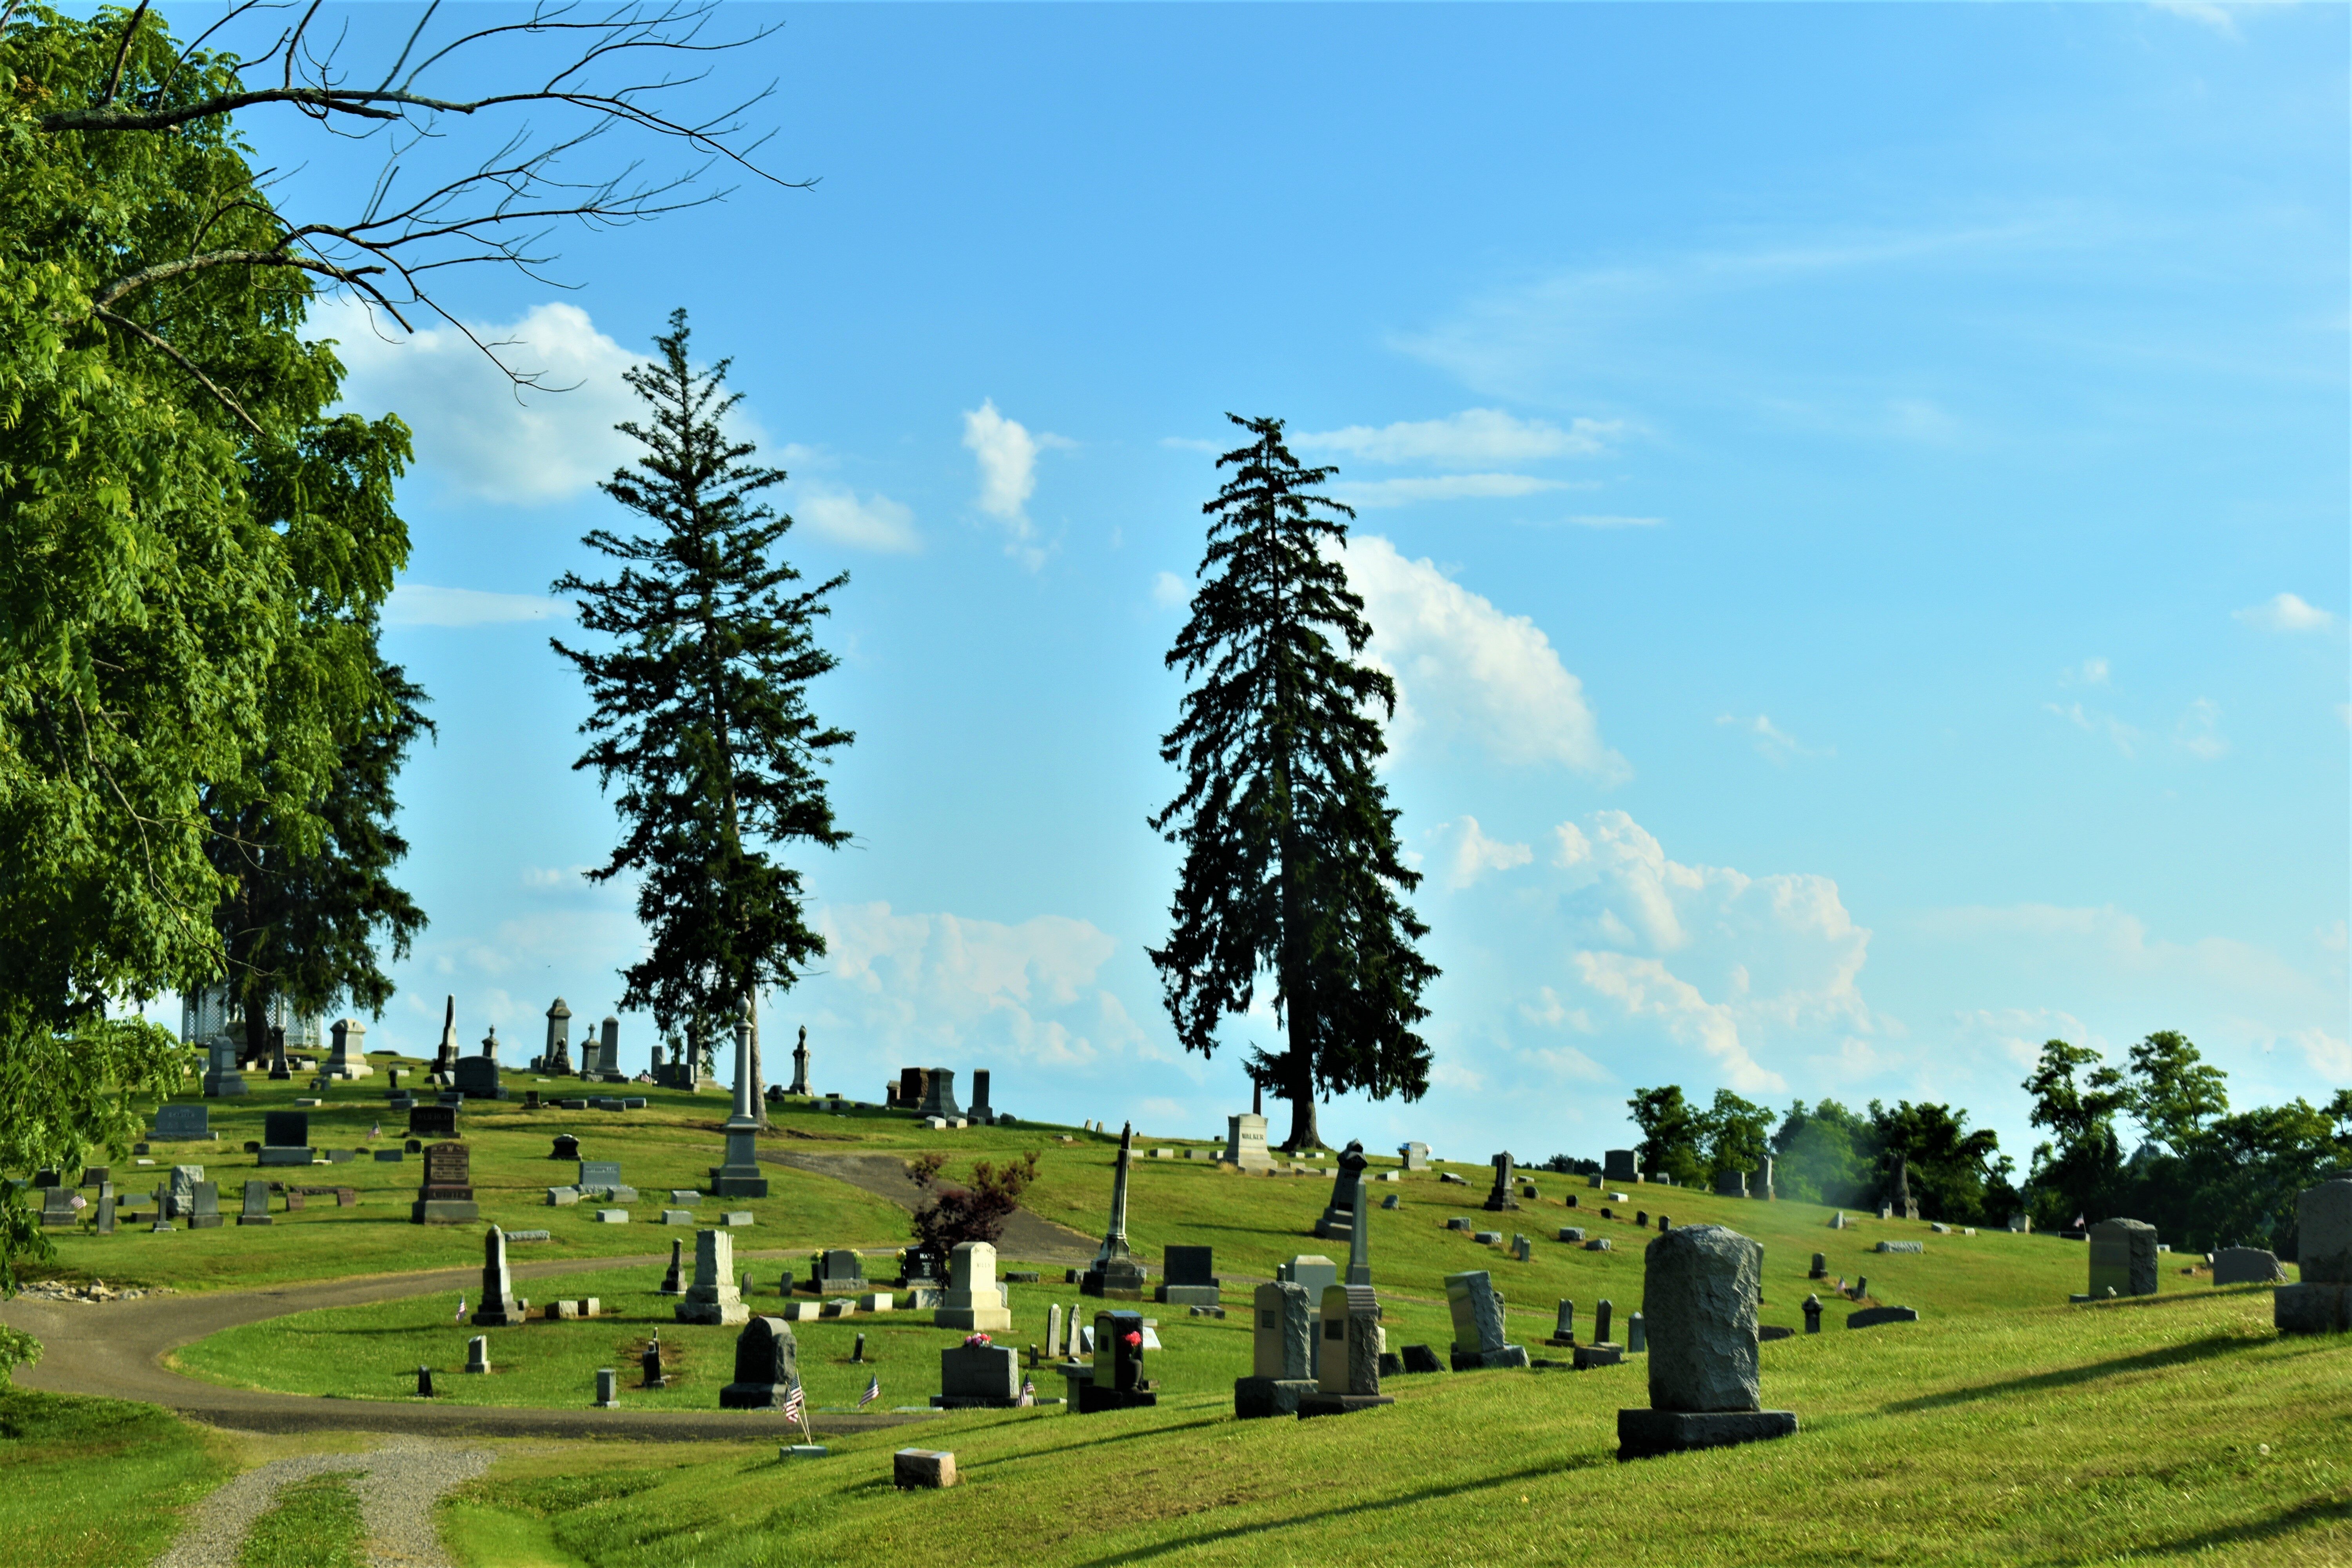 Section of the cemetery